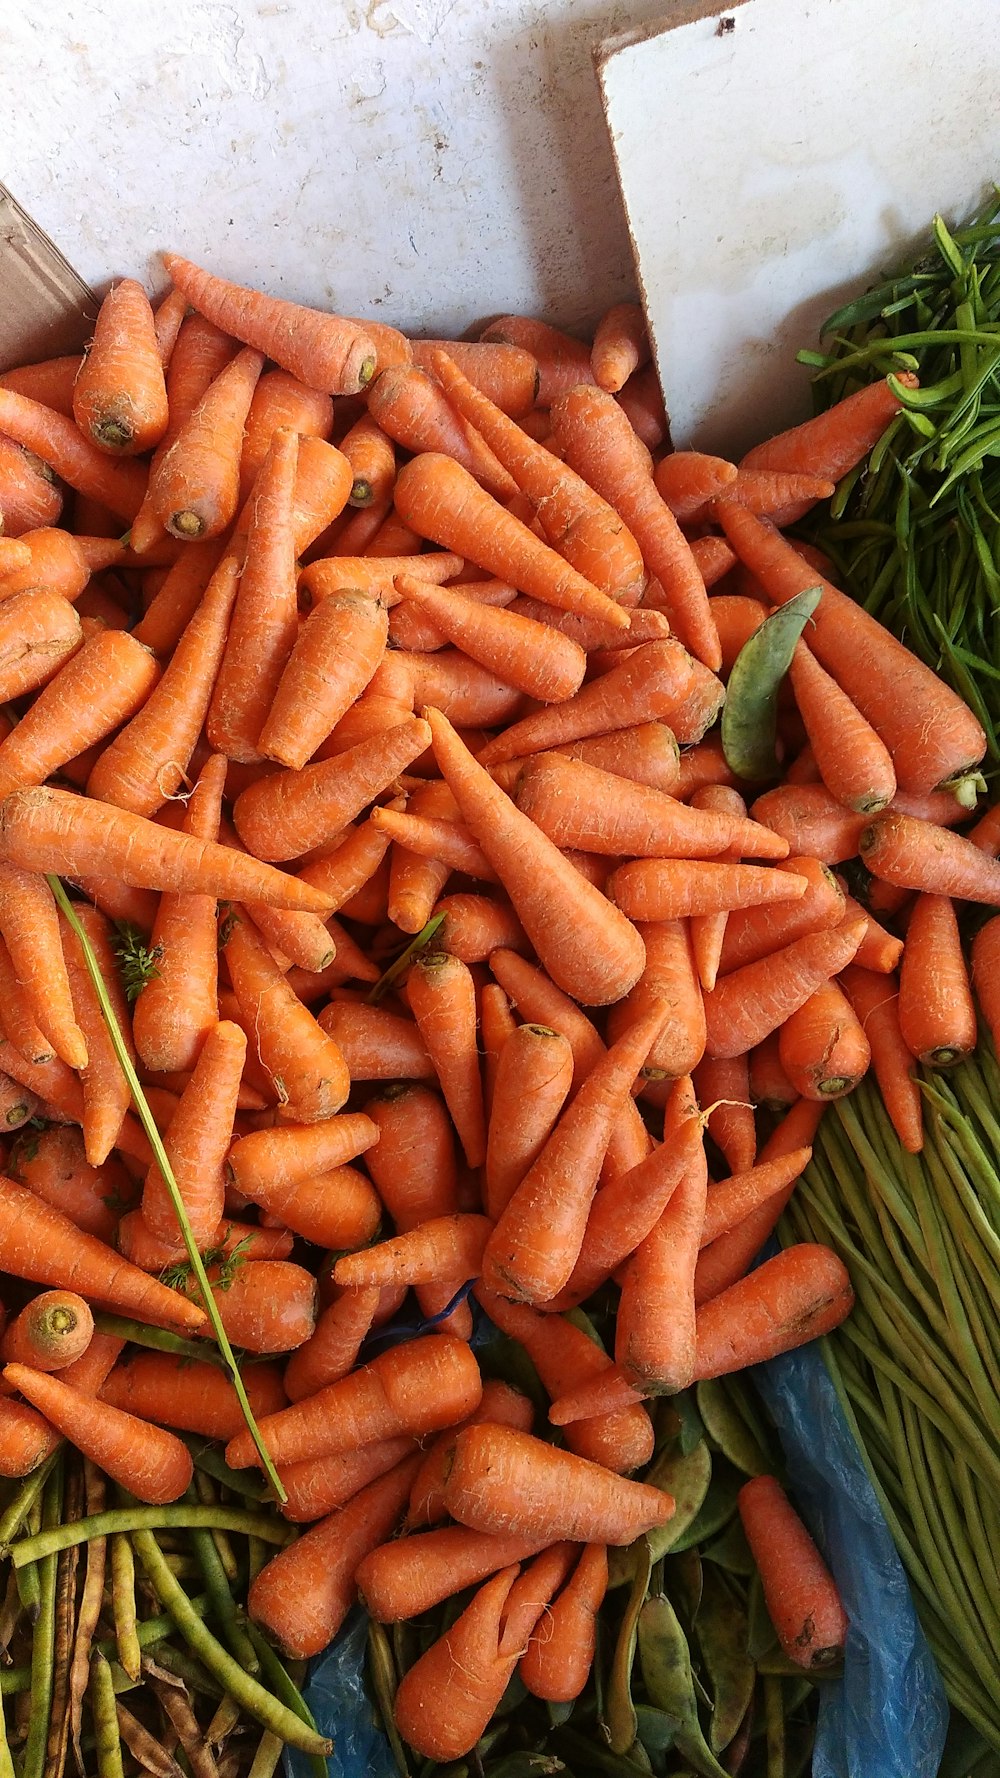 a pile of carrots sitting next to green beans